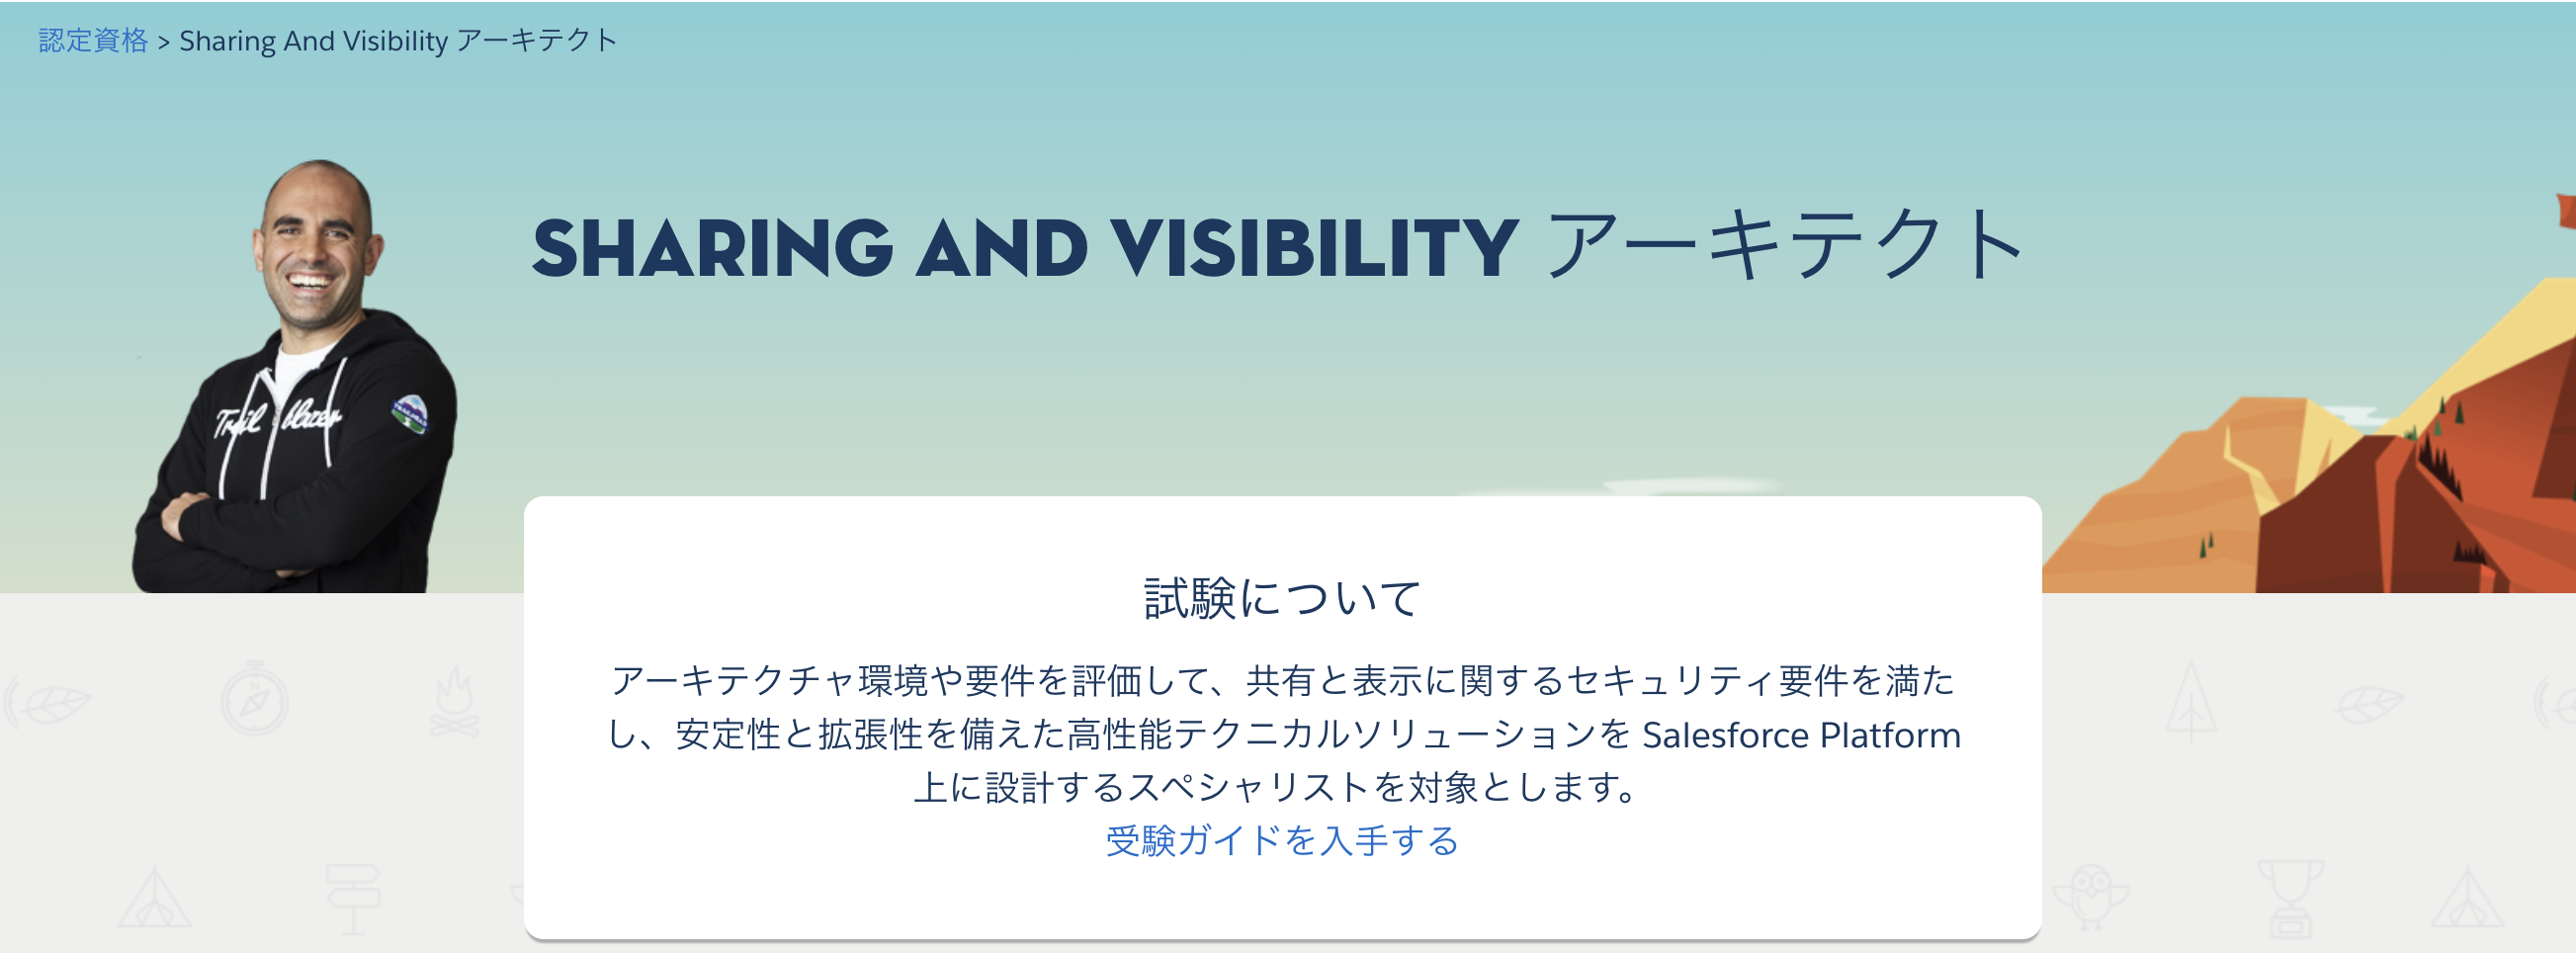 Salesforce 認定 Sharing and Visibility アーキテクト